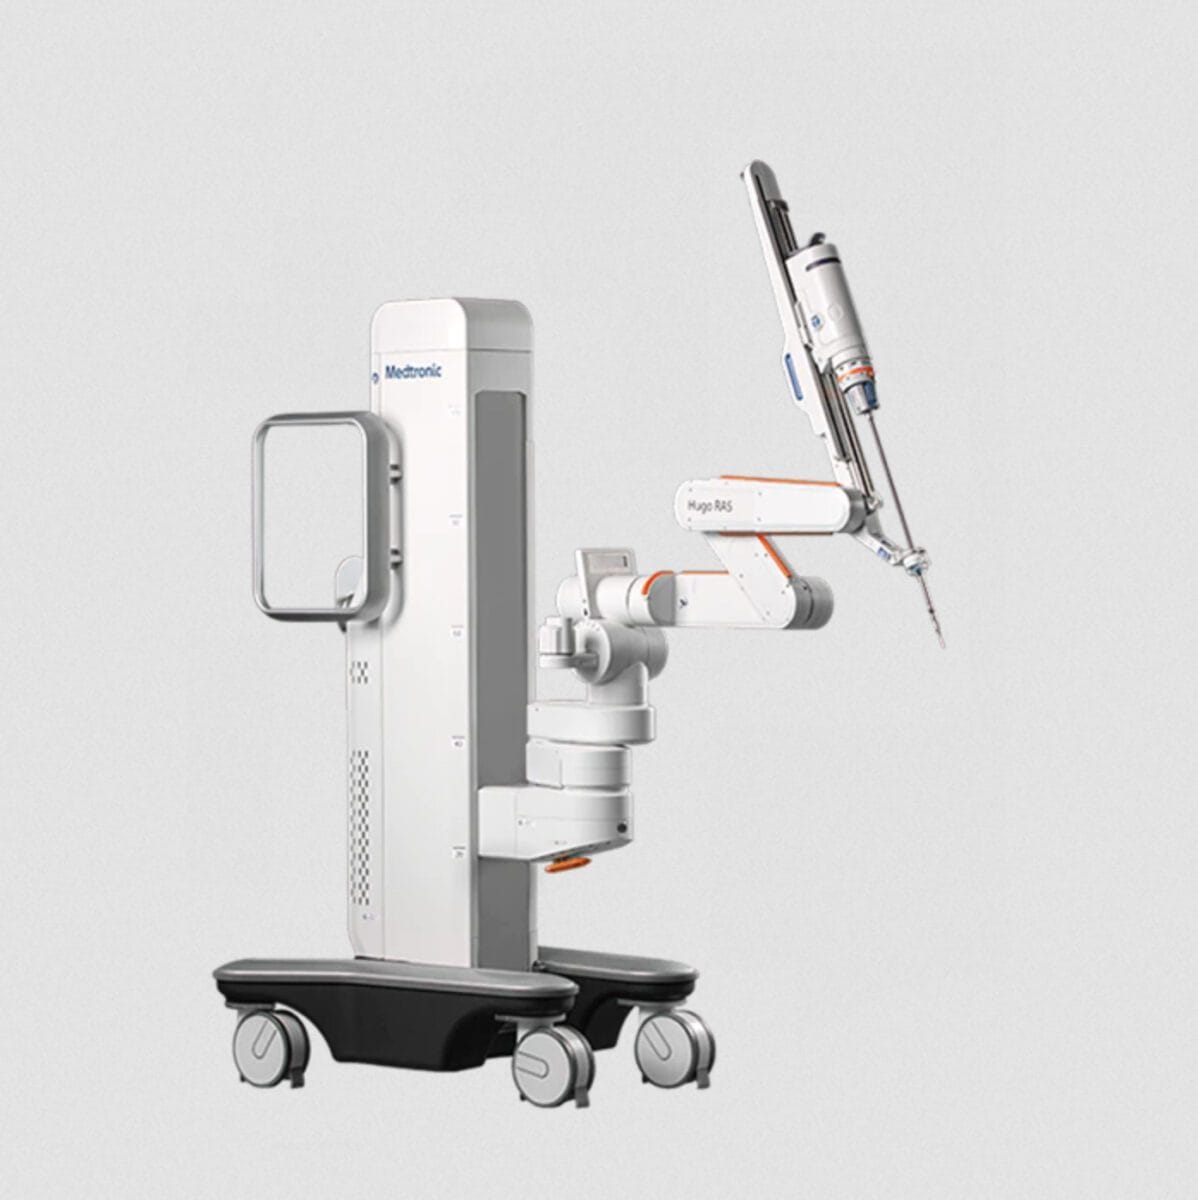 Hugo robotic-assisted surgery system